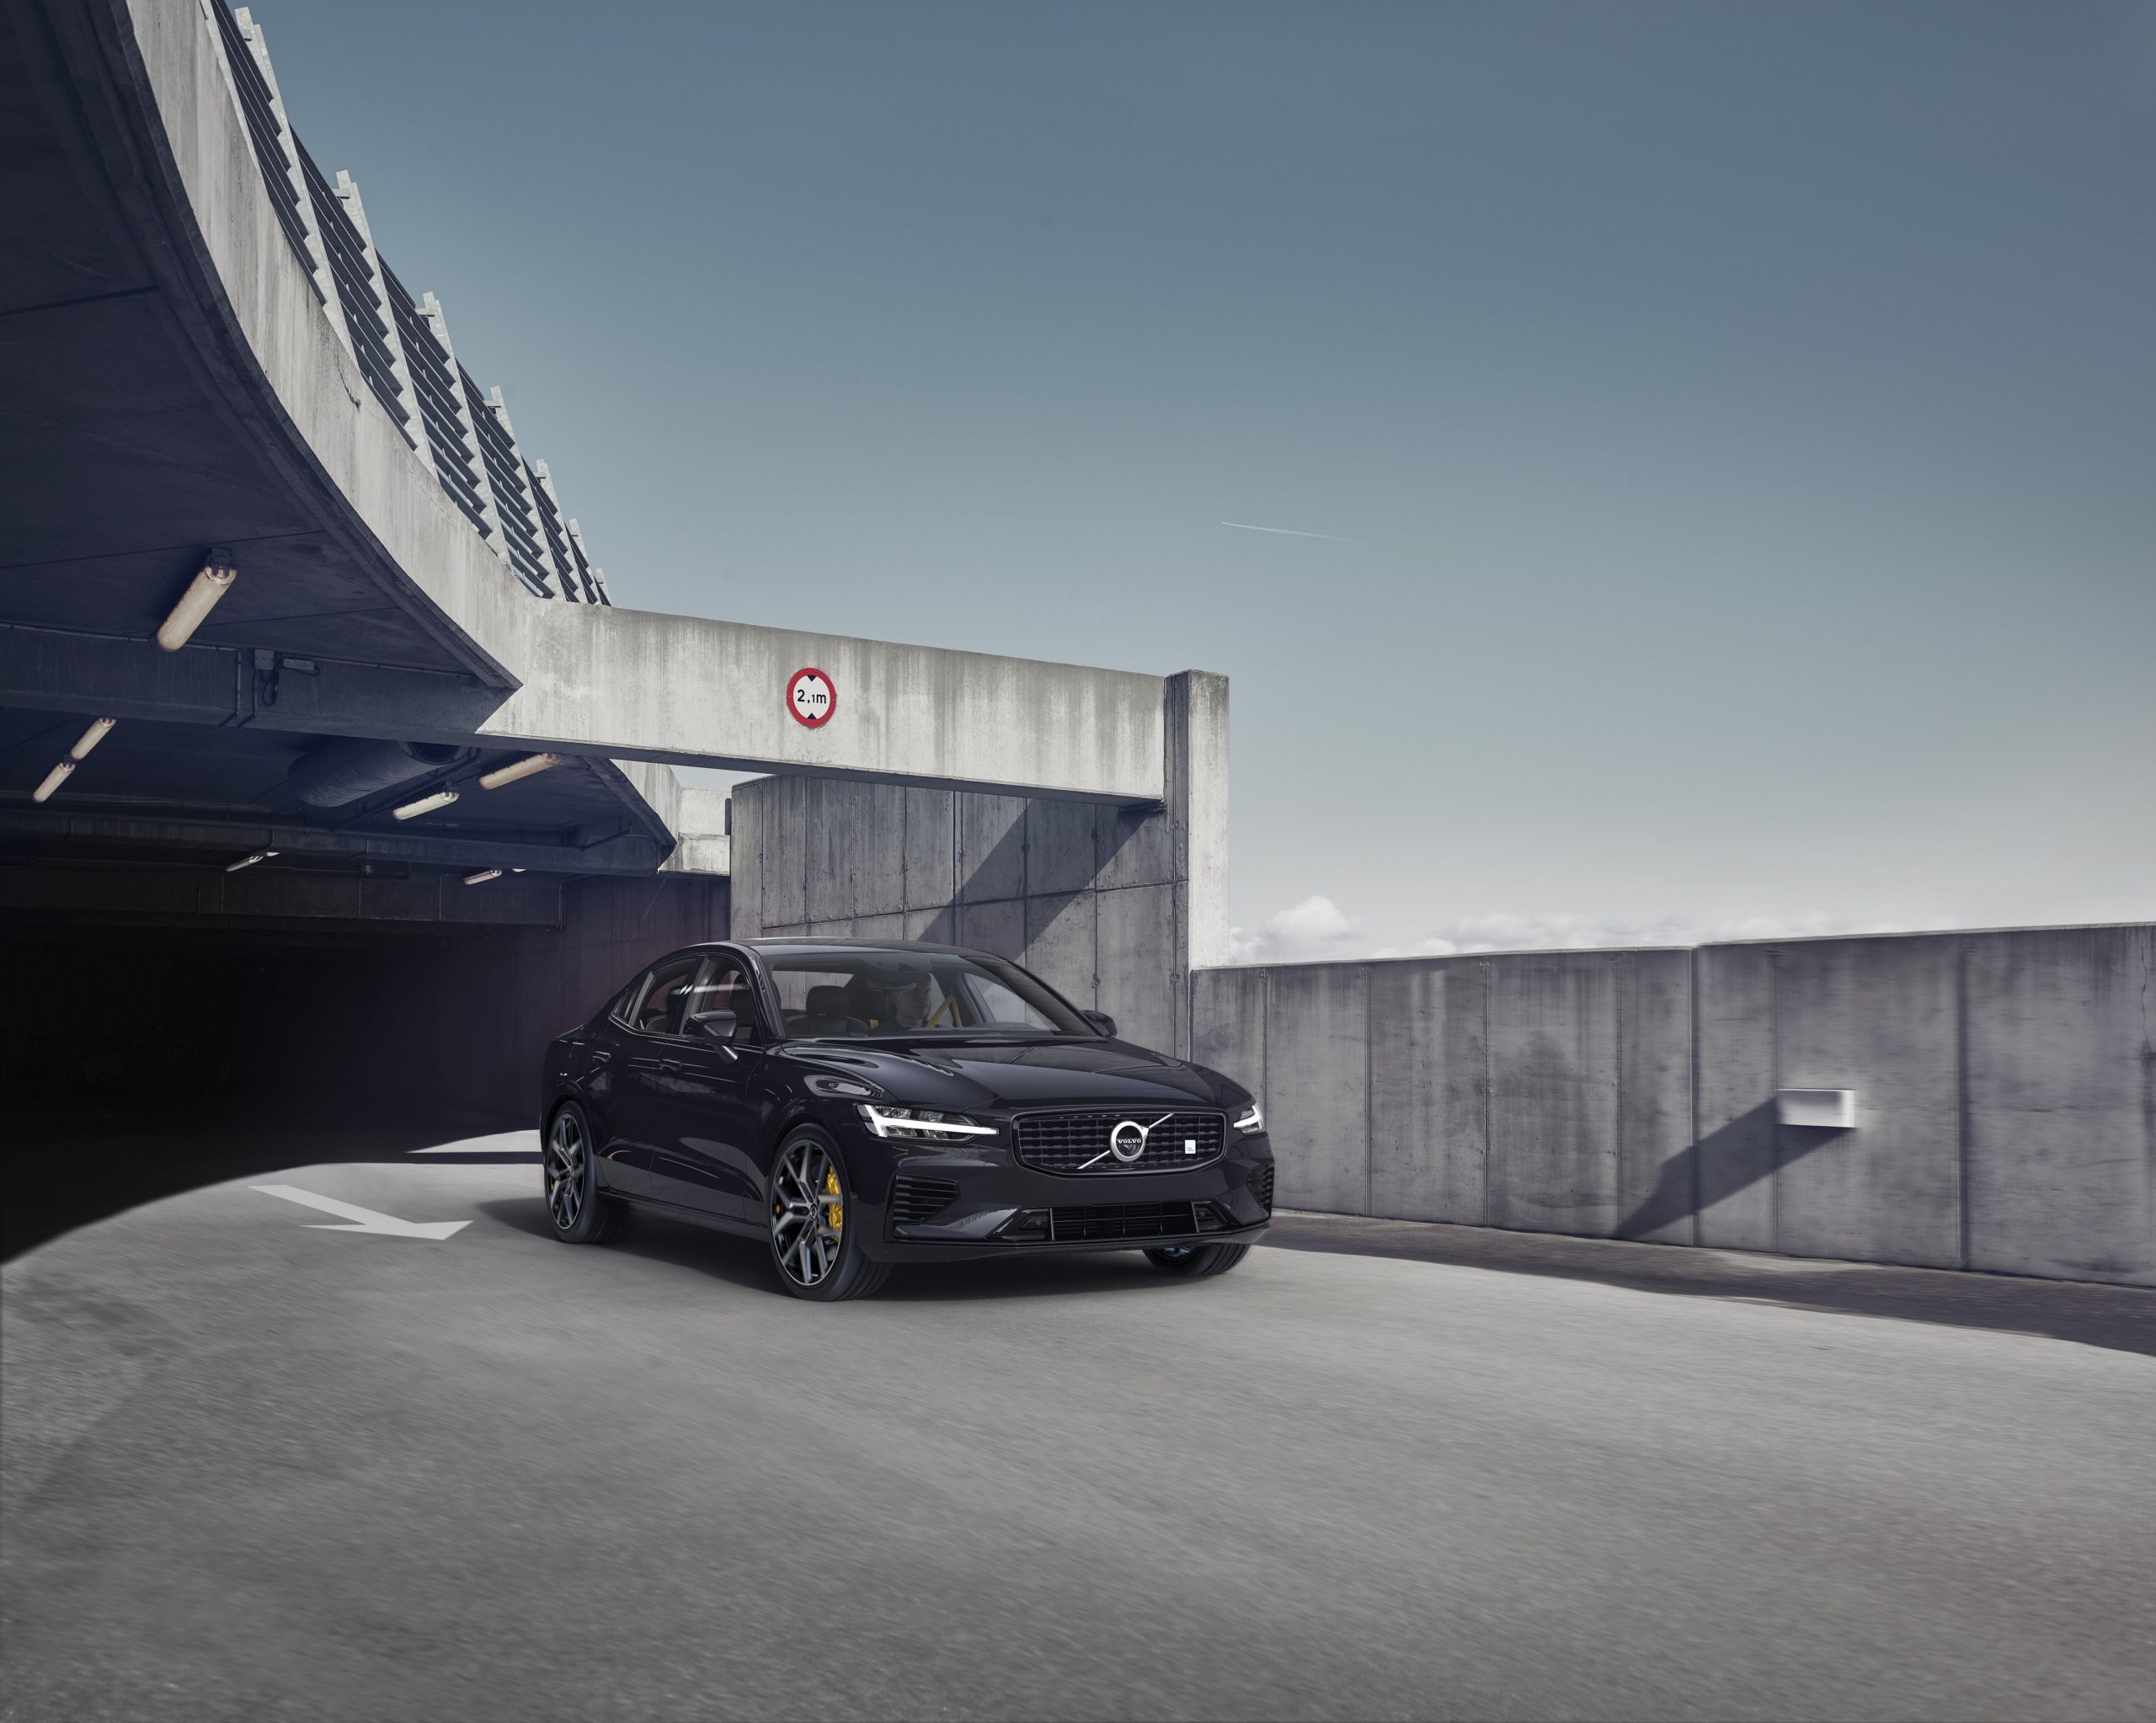 a black 2021 Volvo S60 luxury car pulling out of an upscale urban parking garage